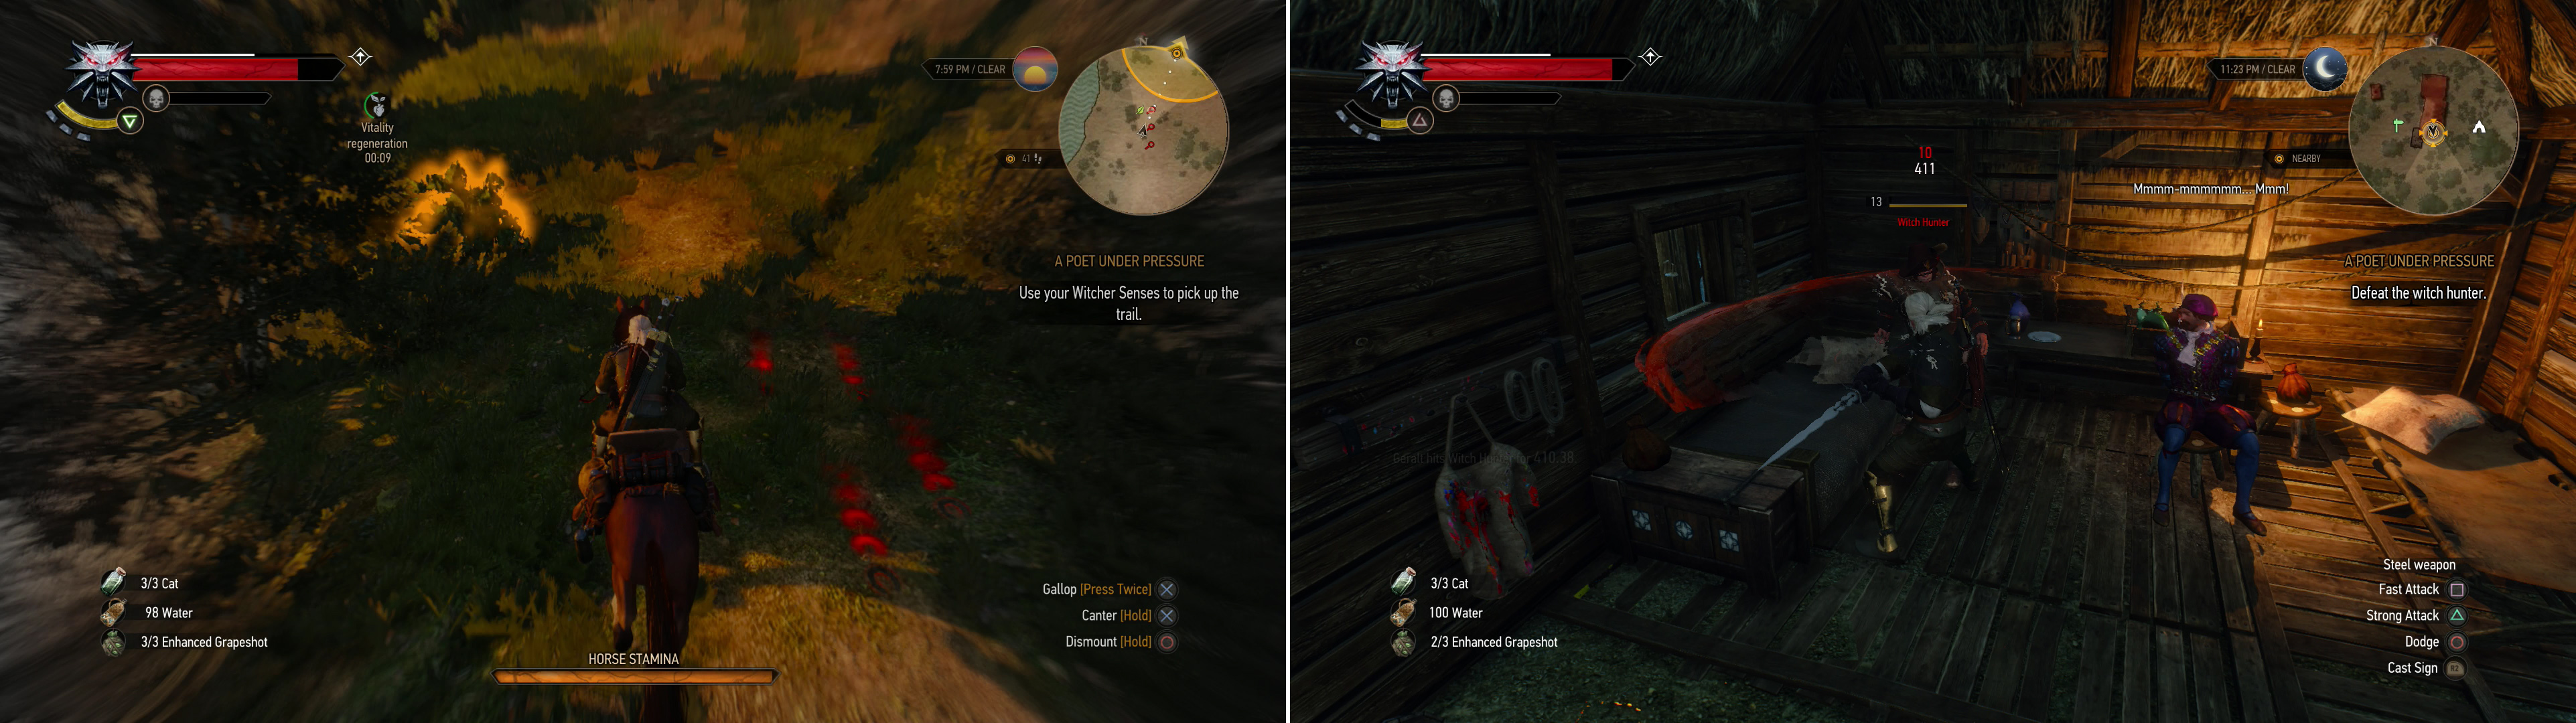 Track the fugitive Witch Hunter down using your Witcher Senses (left) and dispatch him when you find him (right).